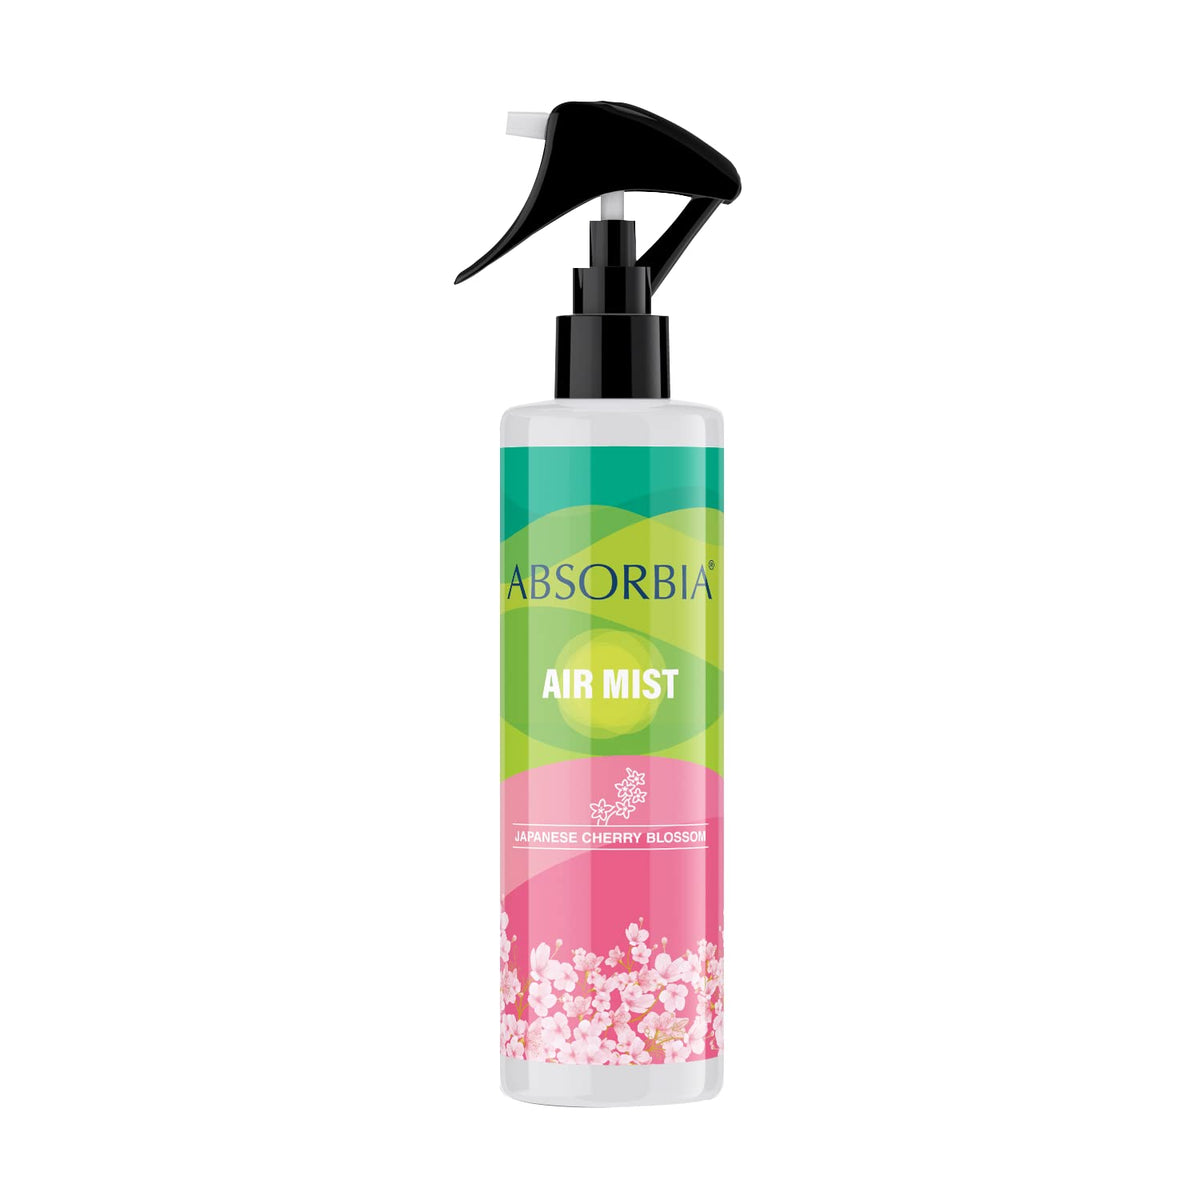 ABSORBIA Room Freshner spray, Instantly Freshens the air with Japanese Cherry Blossom Fragrance, Essential Oil Aroma Works like therapy - 200ML, 1000+ sprays(Approx)…